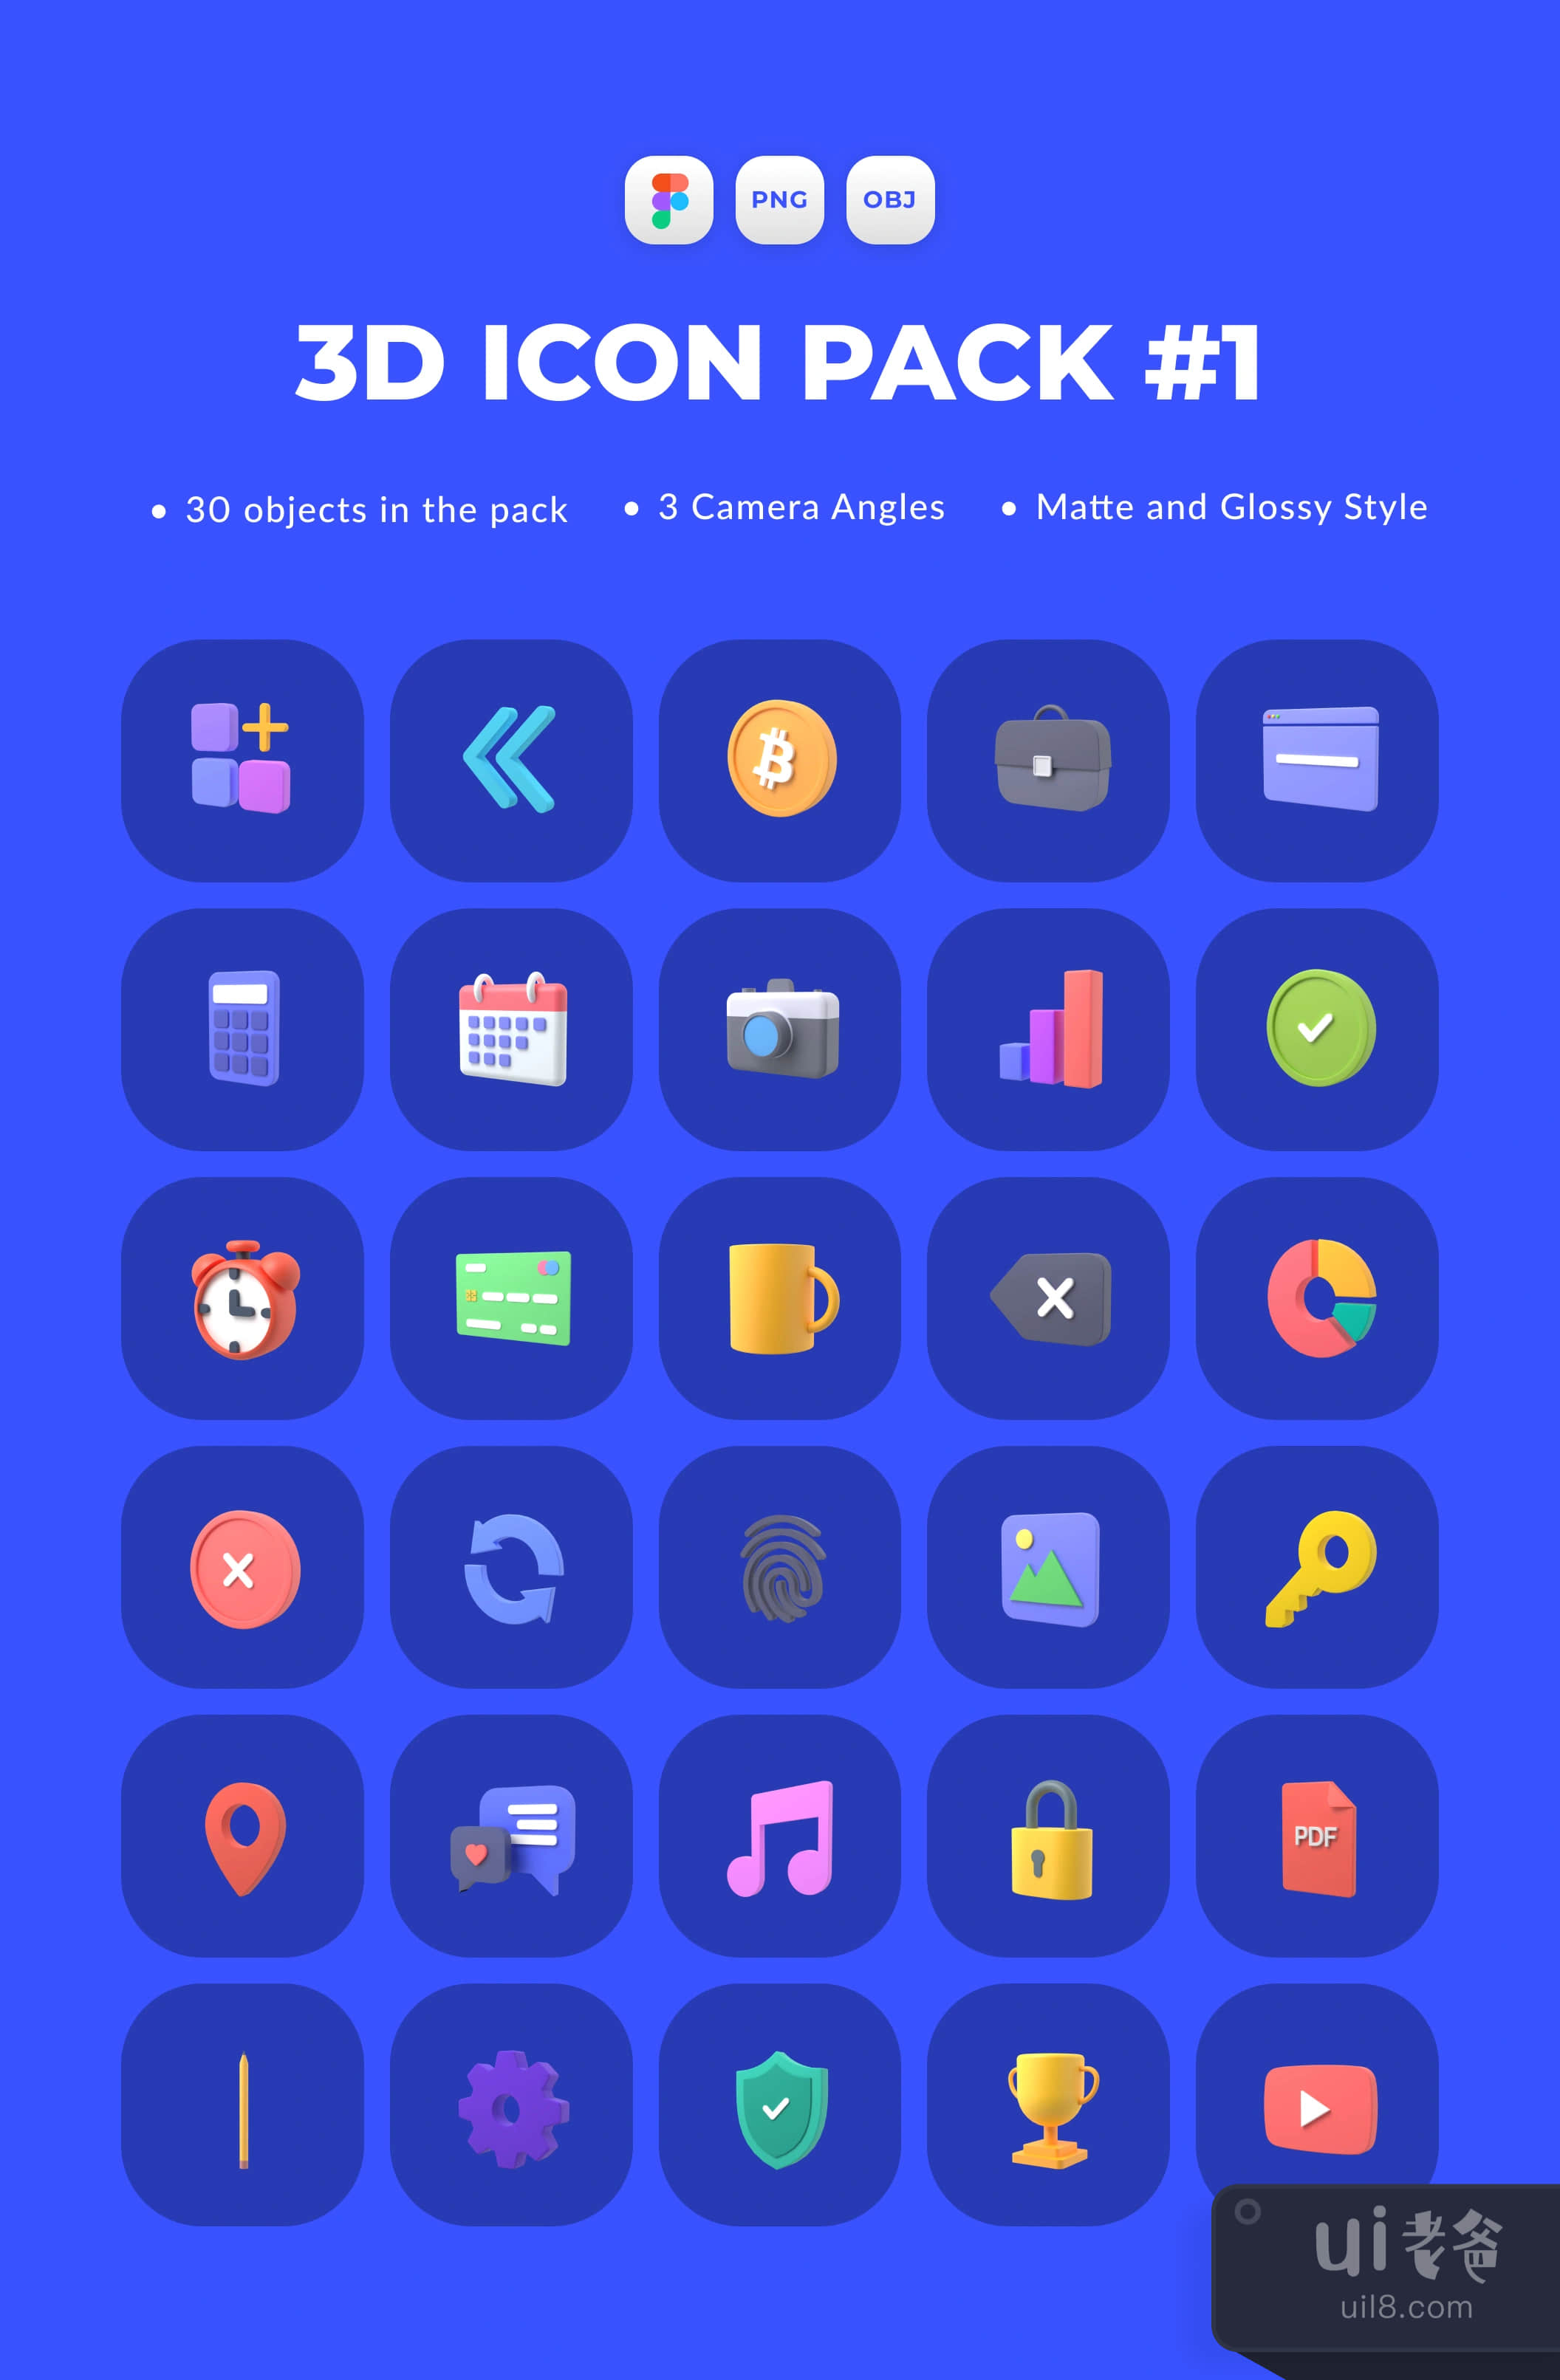 3D图标包#1 (3D Icon Pack #1)插图